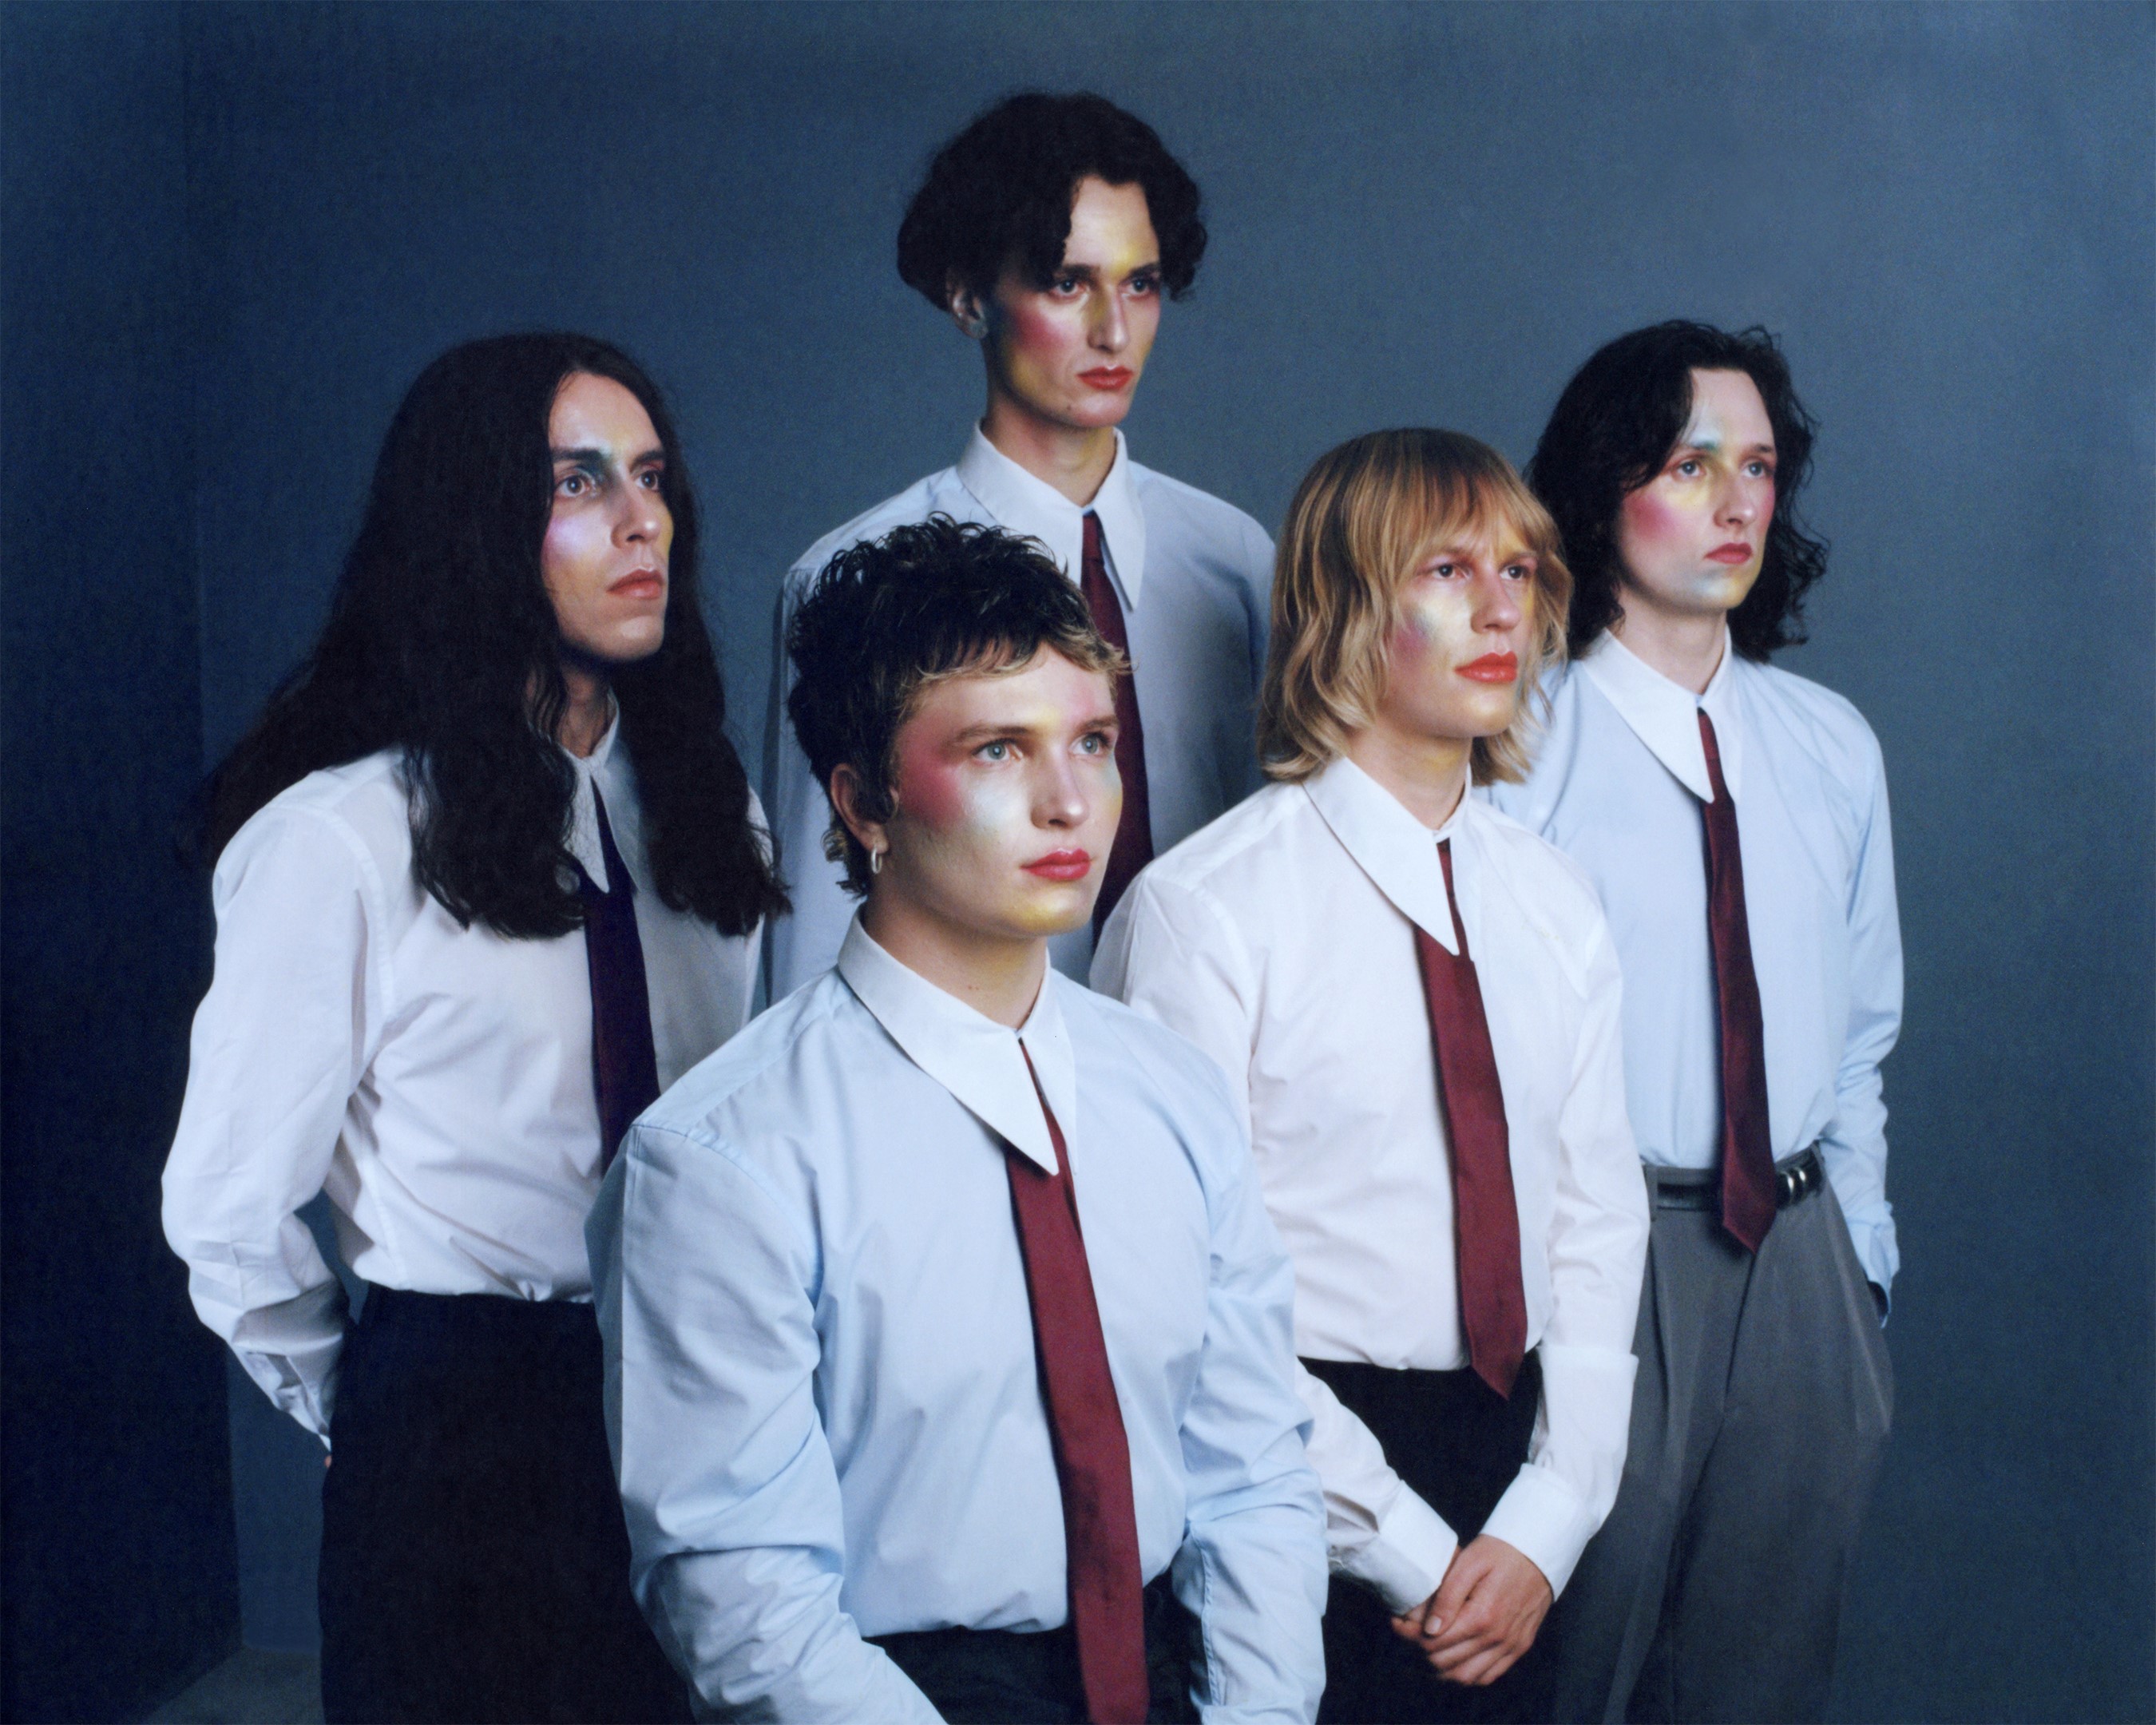 A portrait of the Glasgow band Walt Disco, a four-piece dressed in white shirts and ties